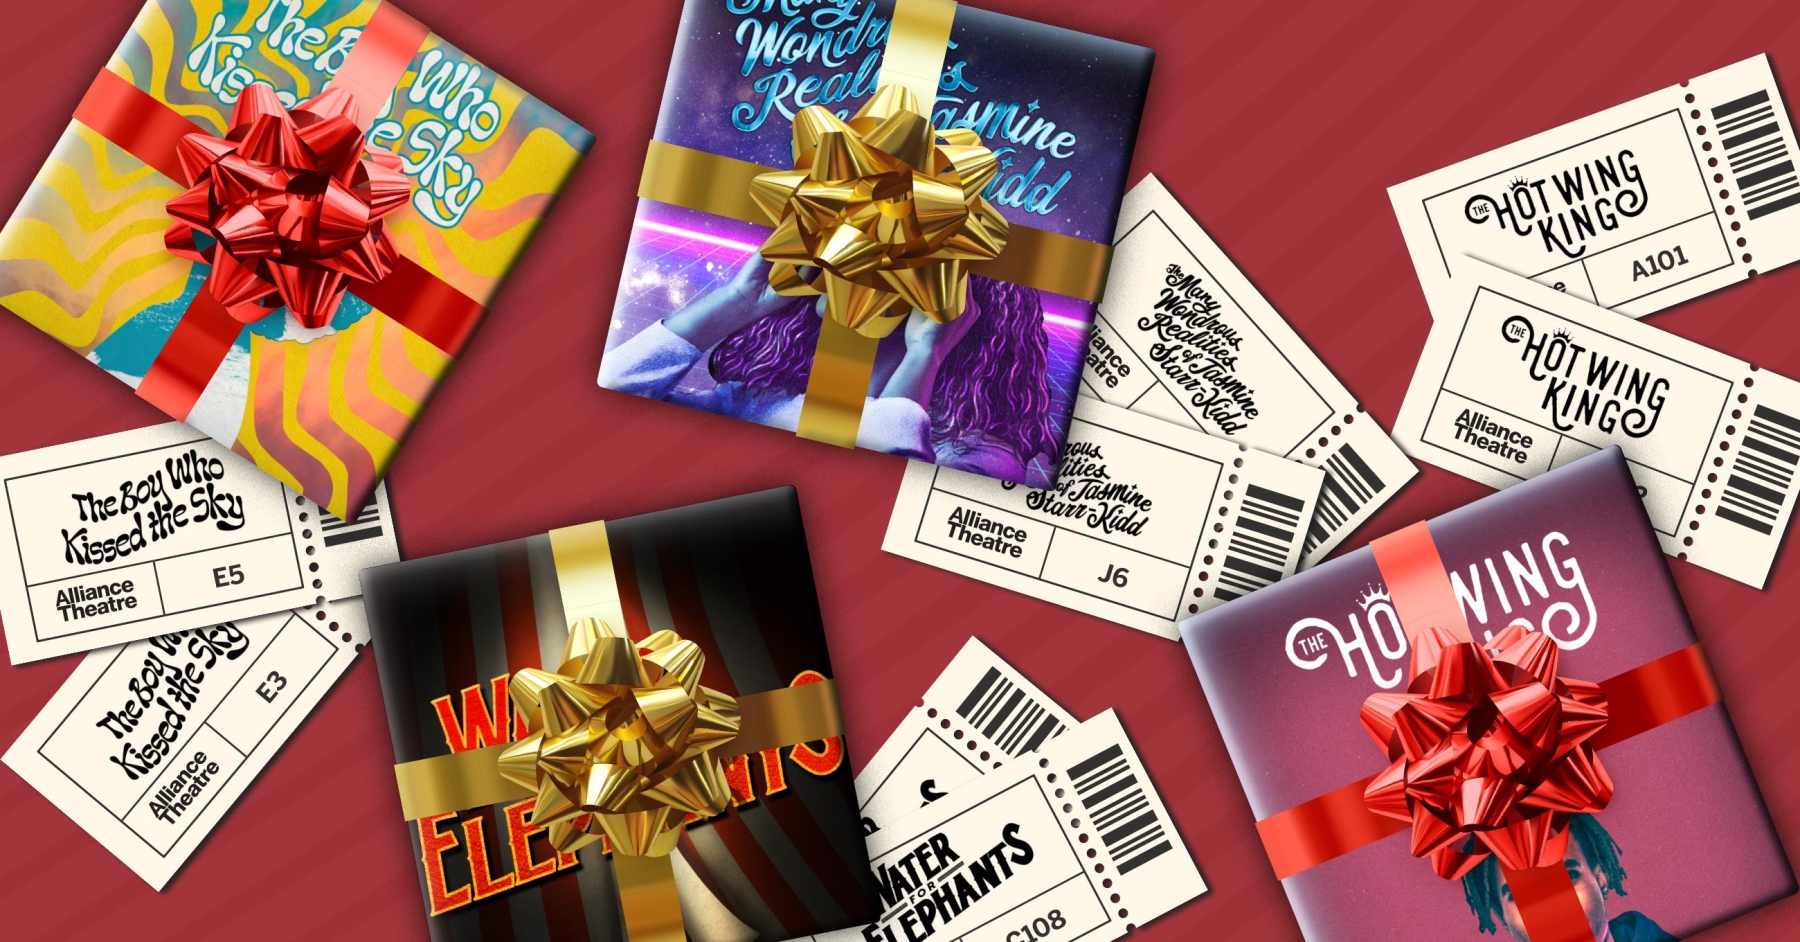 preview image for the holiday gift guide showing tickets and gifts